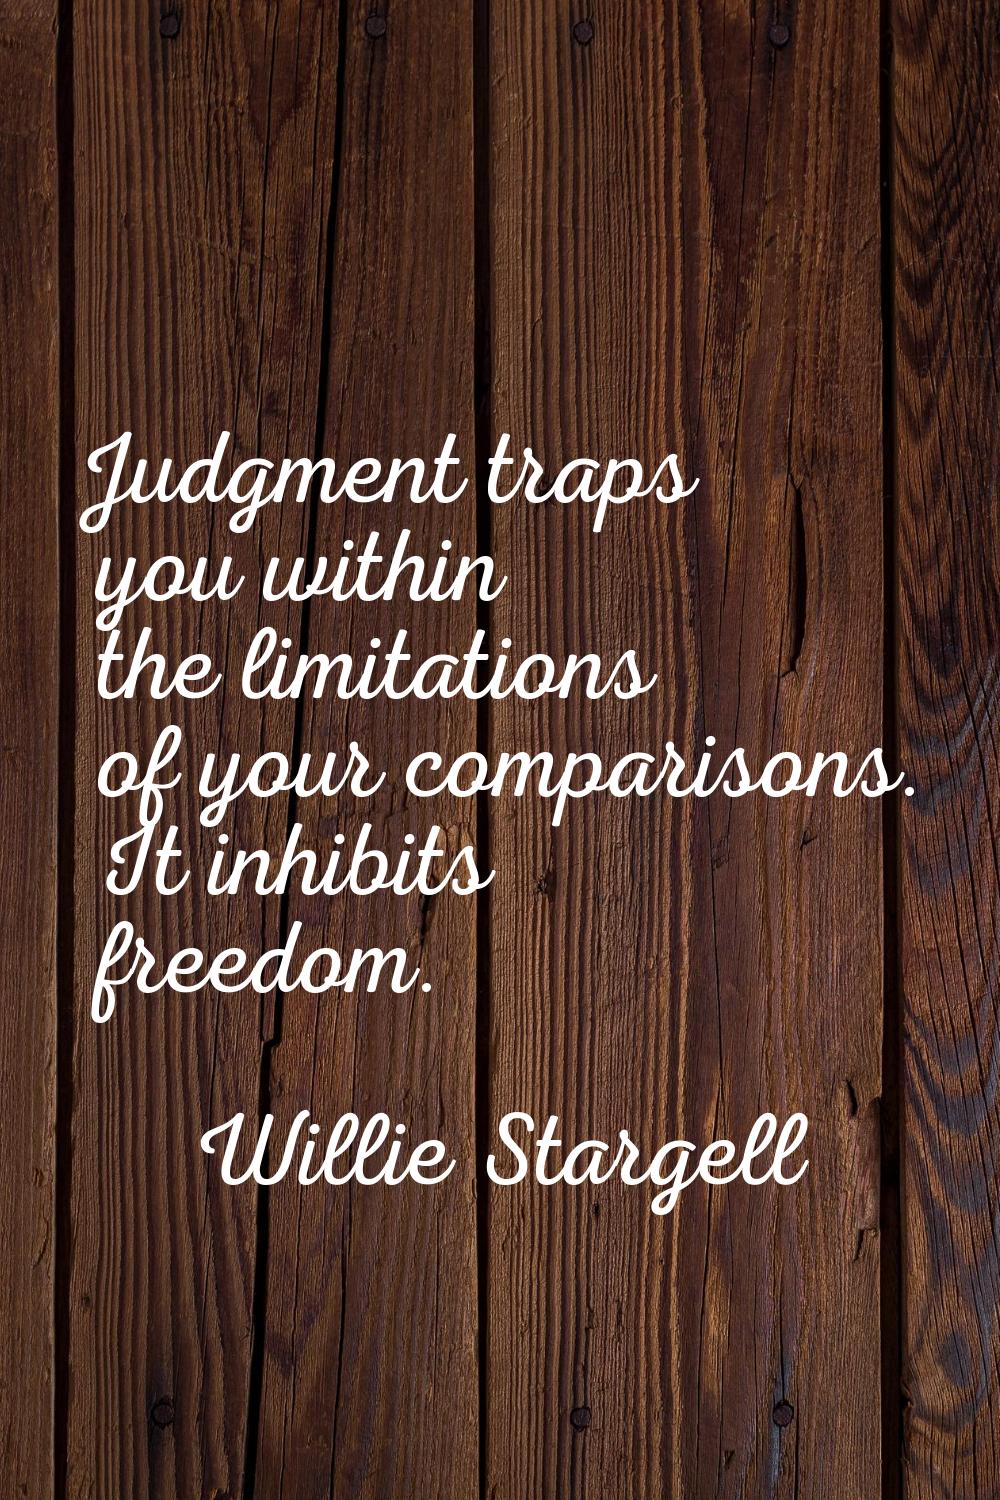 Judgment traps you within the limitations of your comparisons. It inhibits freedom.